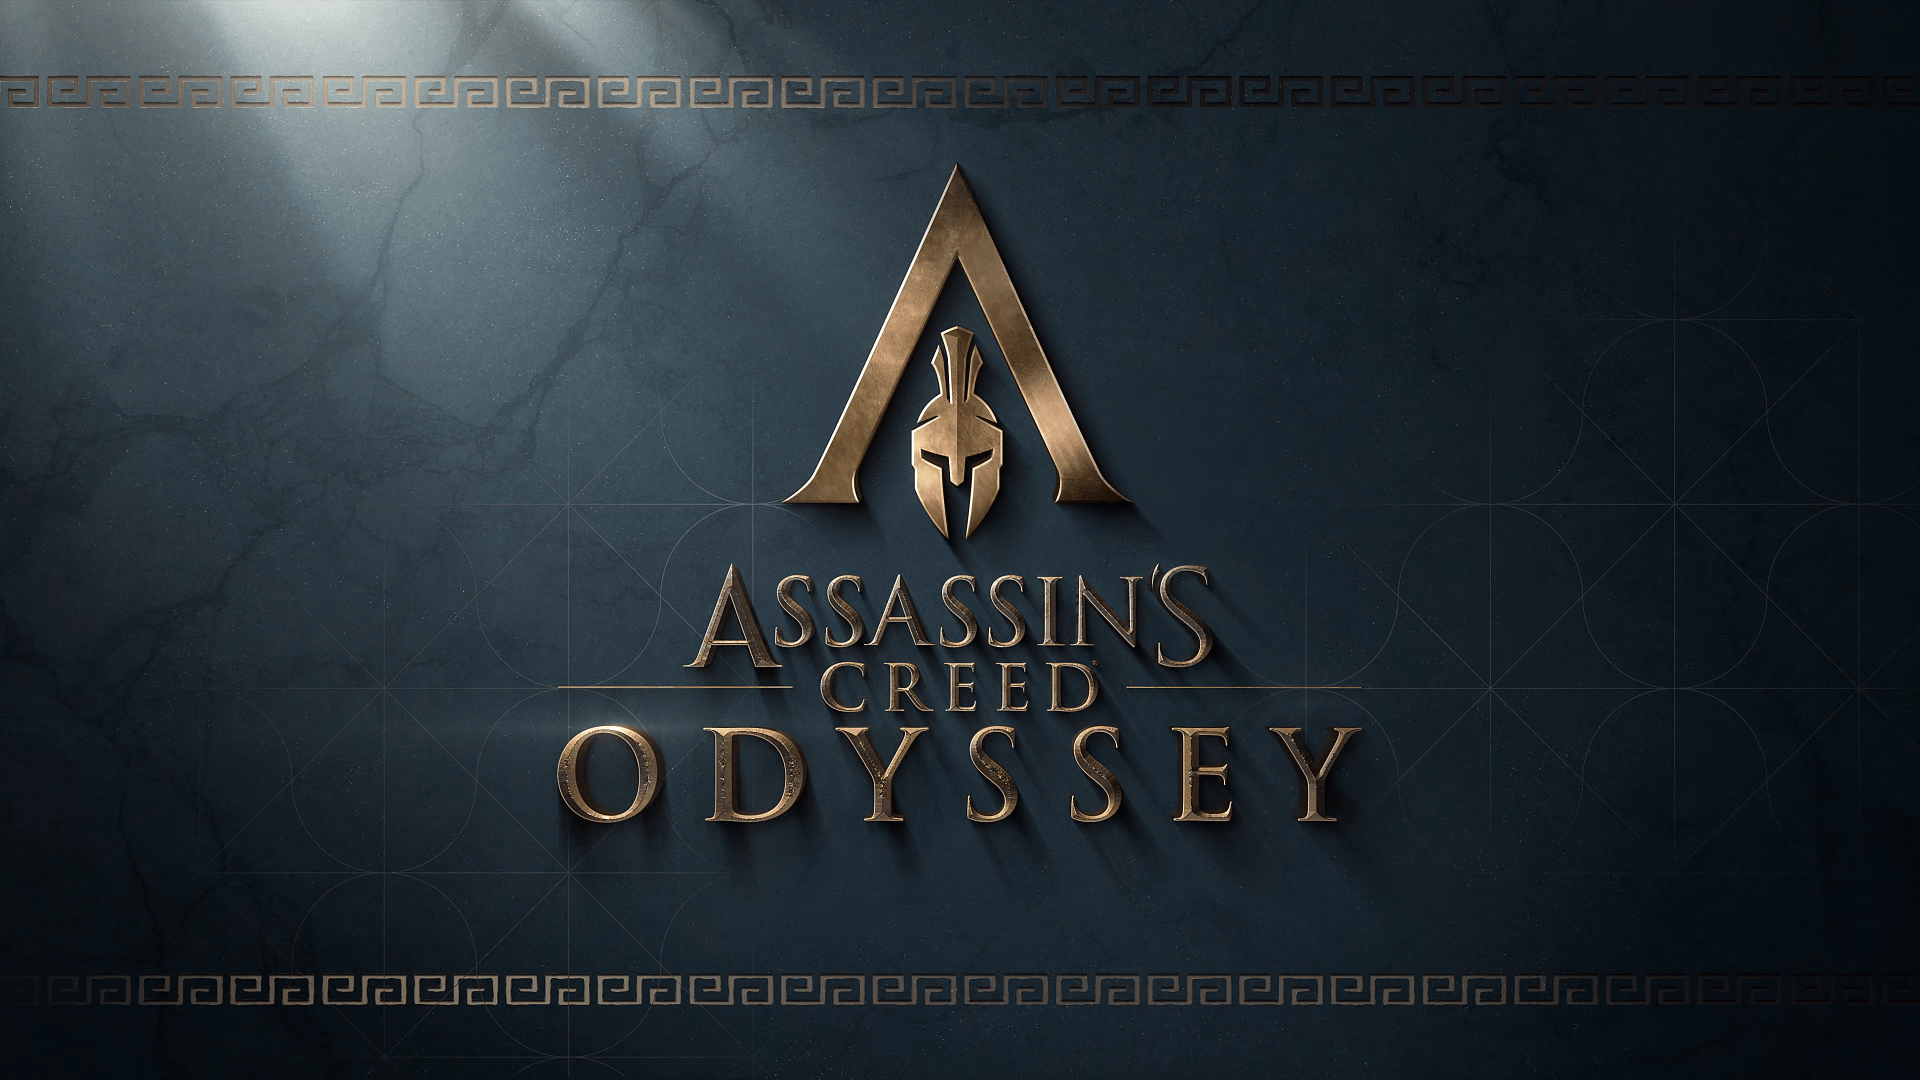 CC Game Logo - Spartans, #Assassin's Creed, #Assassin's Creed Odyssey, #Greece ...